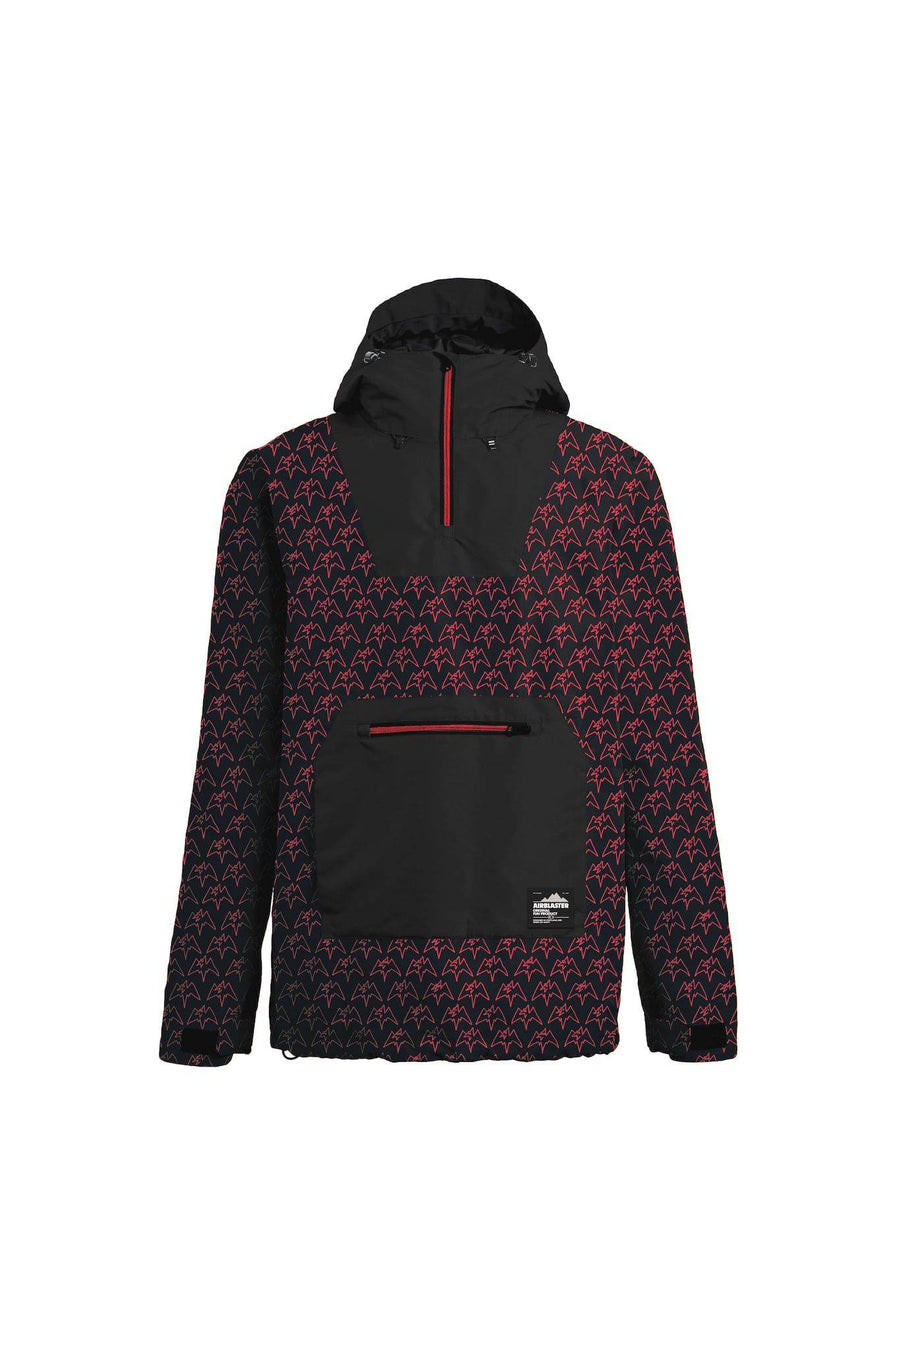 Airblaster Freedom Pullover Jacket in Crimson Terry 2023